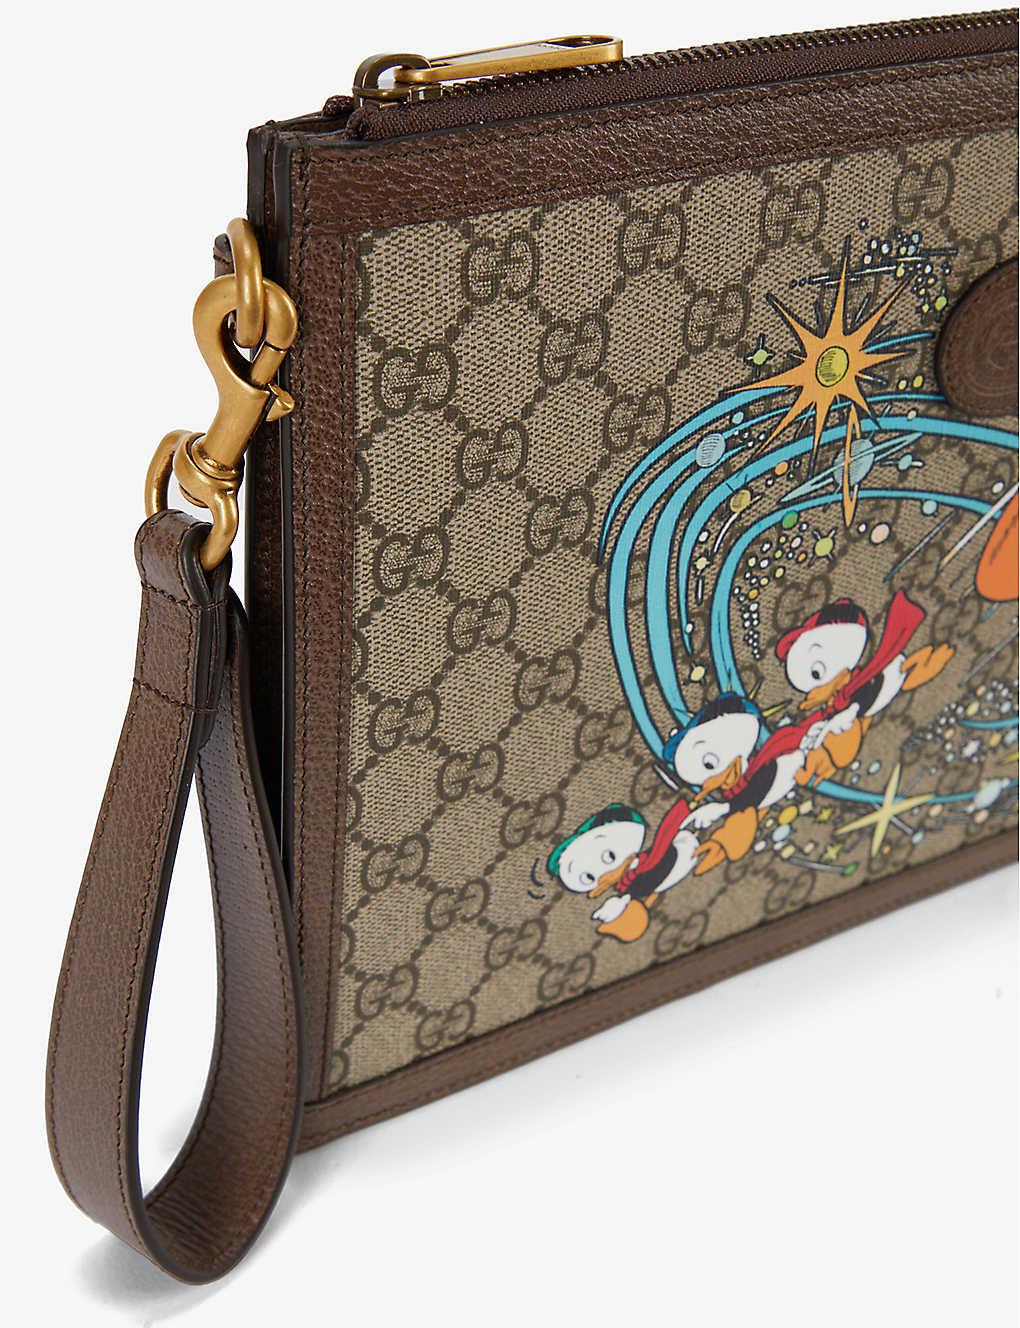 Gucci X Disney Donald Duck Canvas And Leather Clutch Bag for Men 